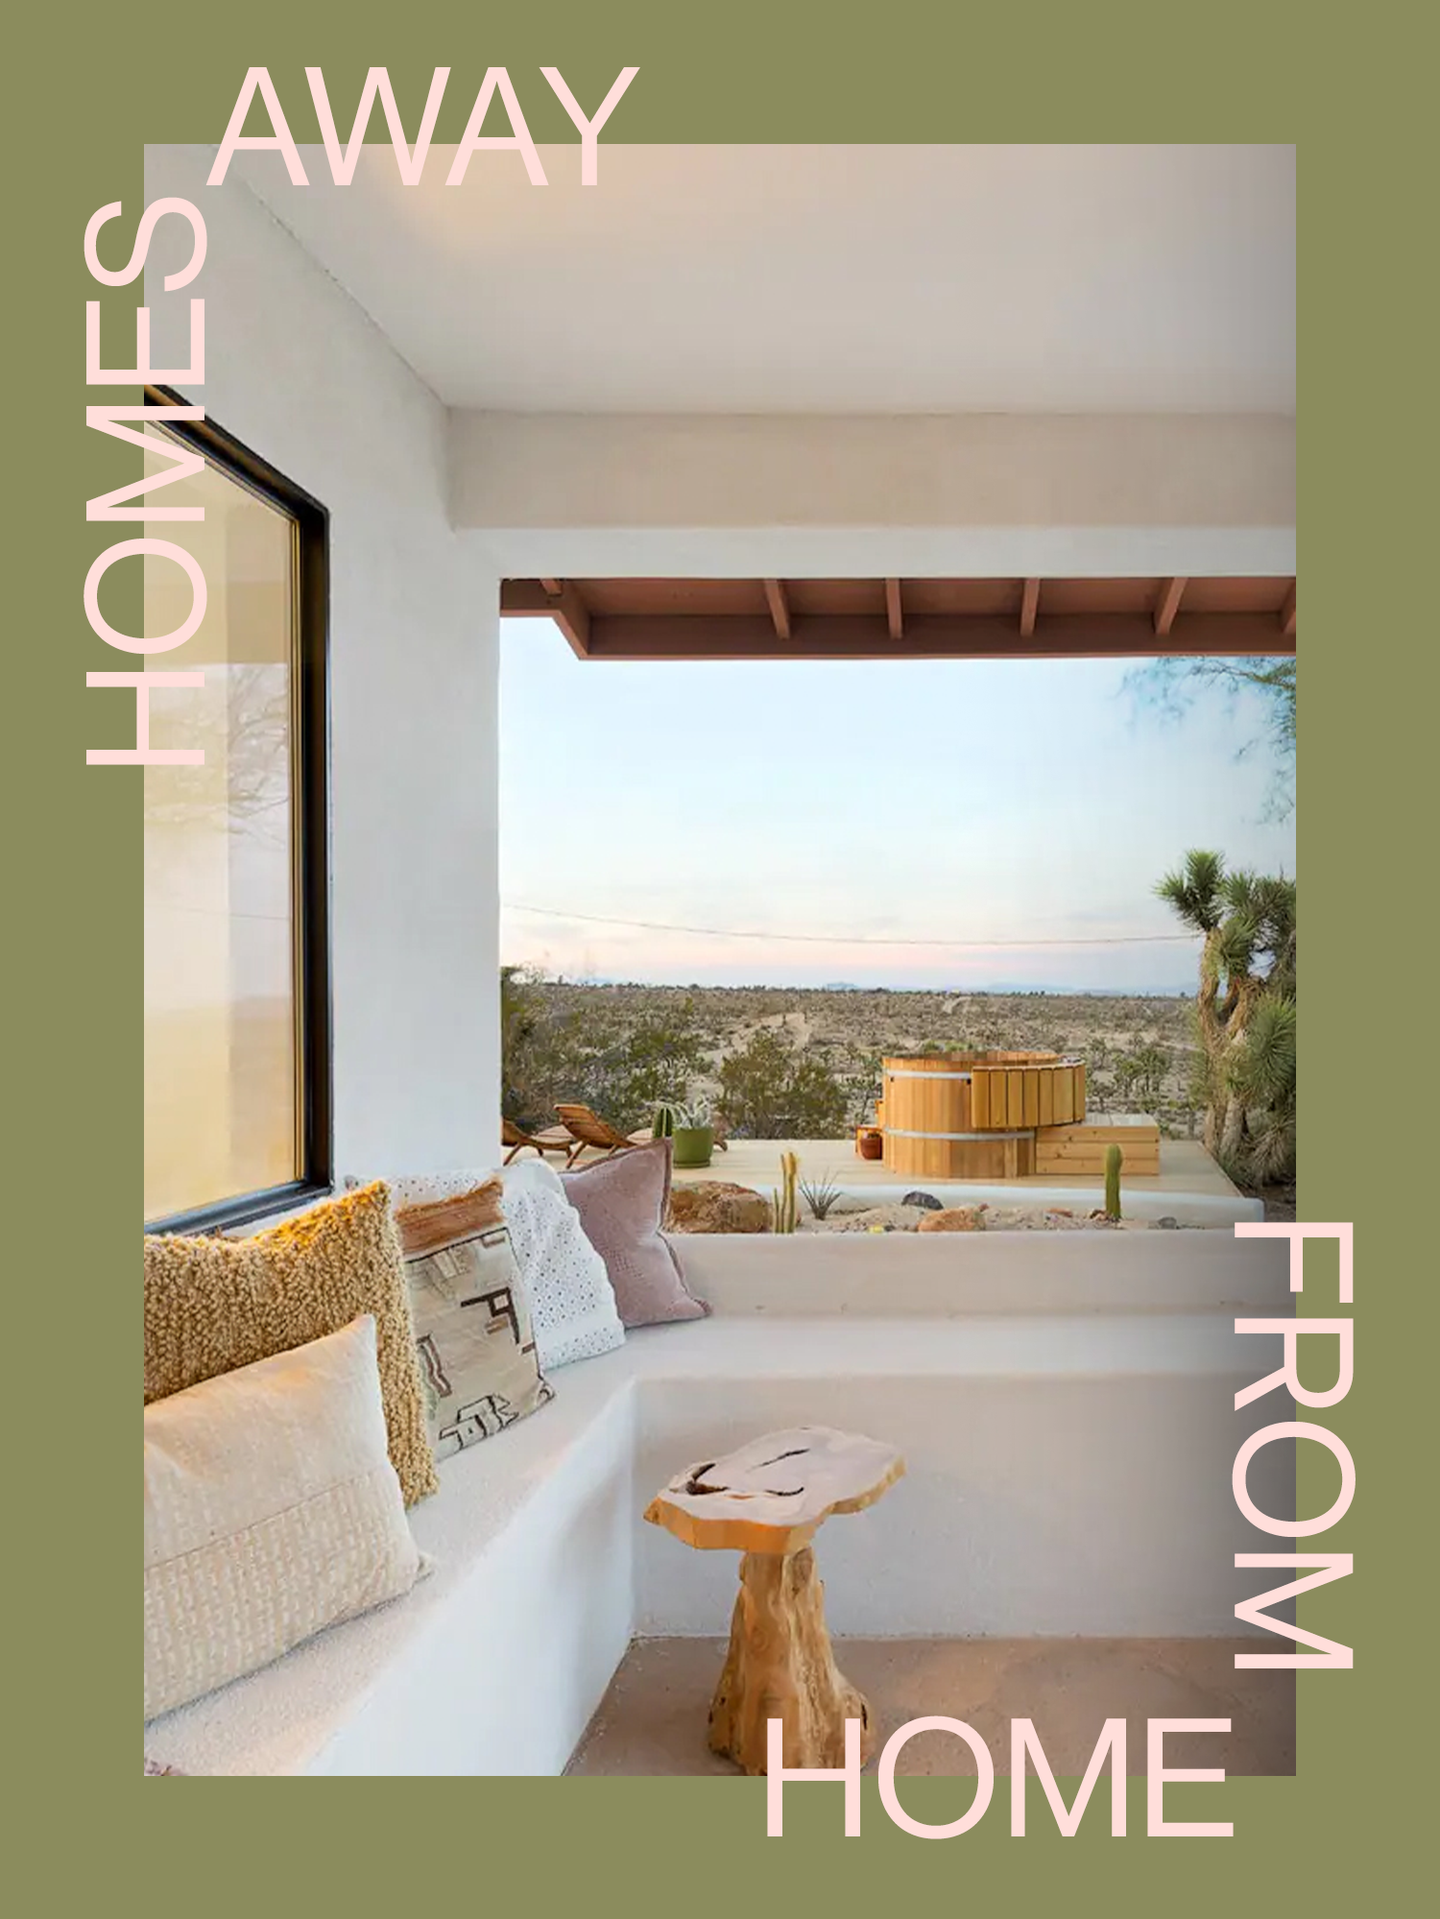 Desert living room with Homes Away From Homes logo